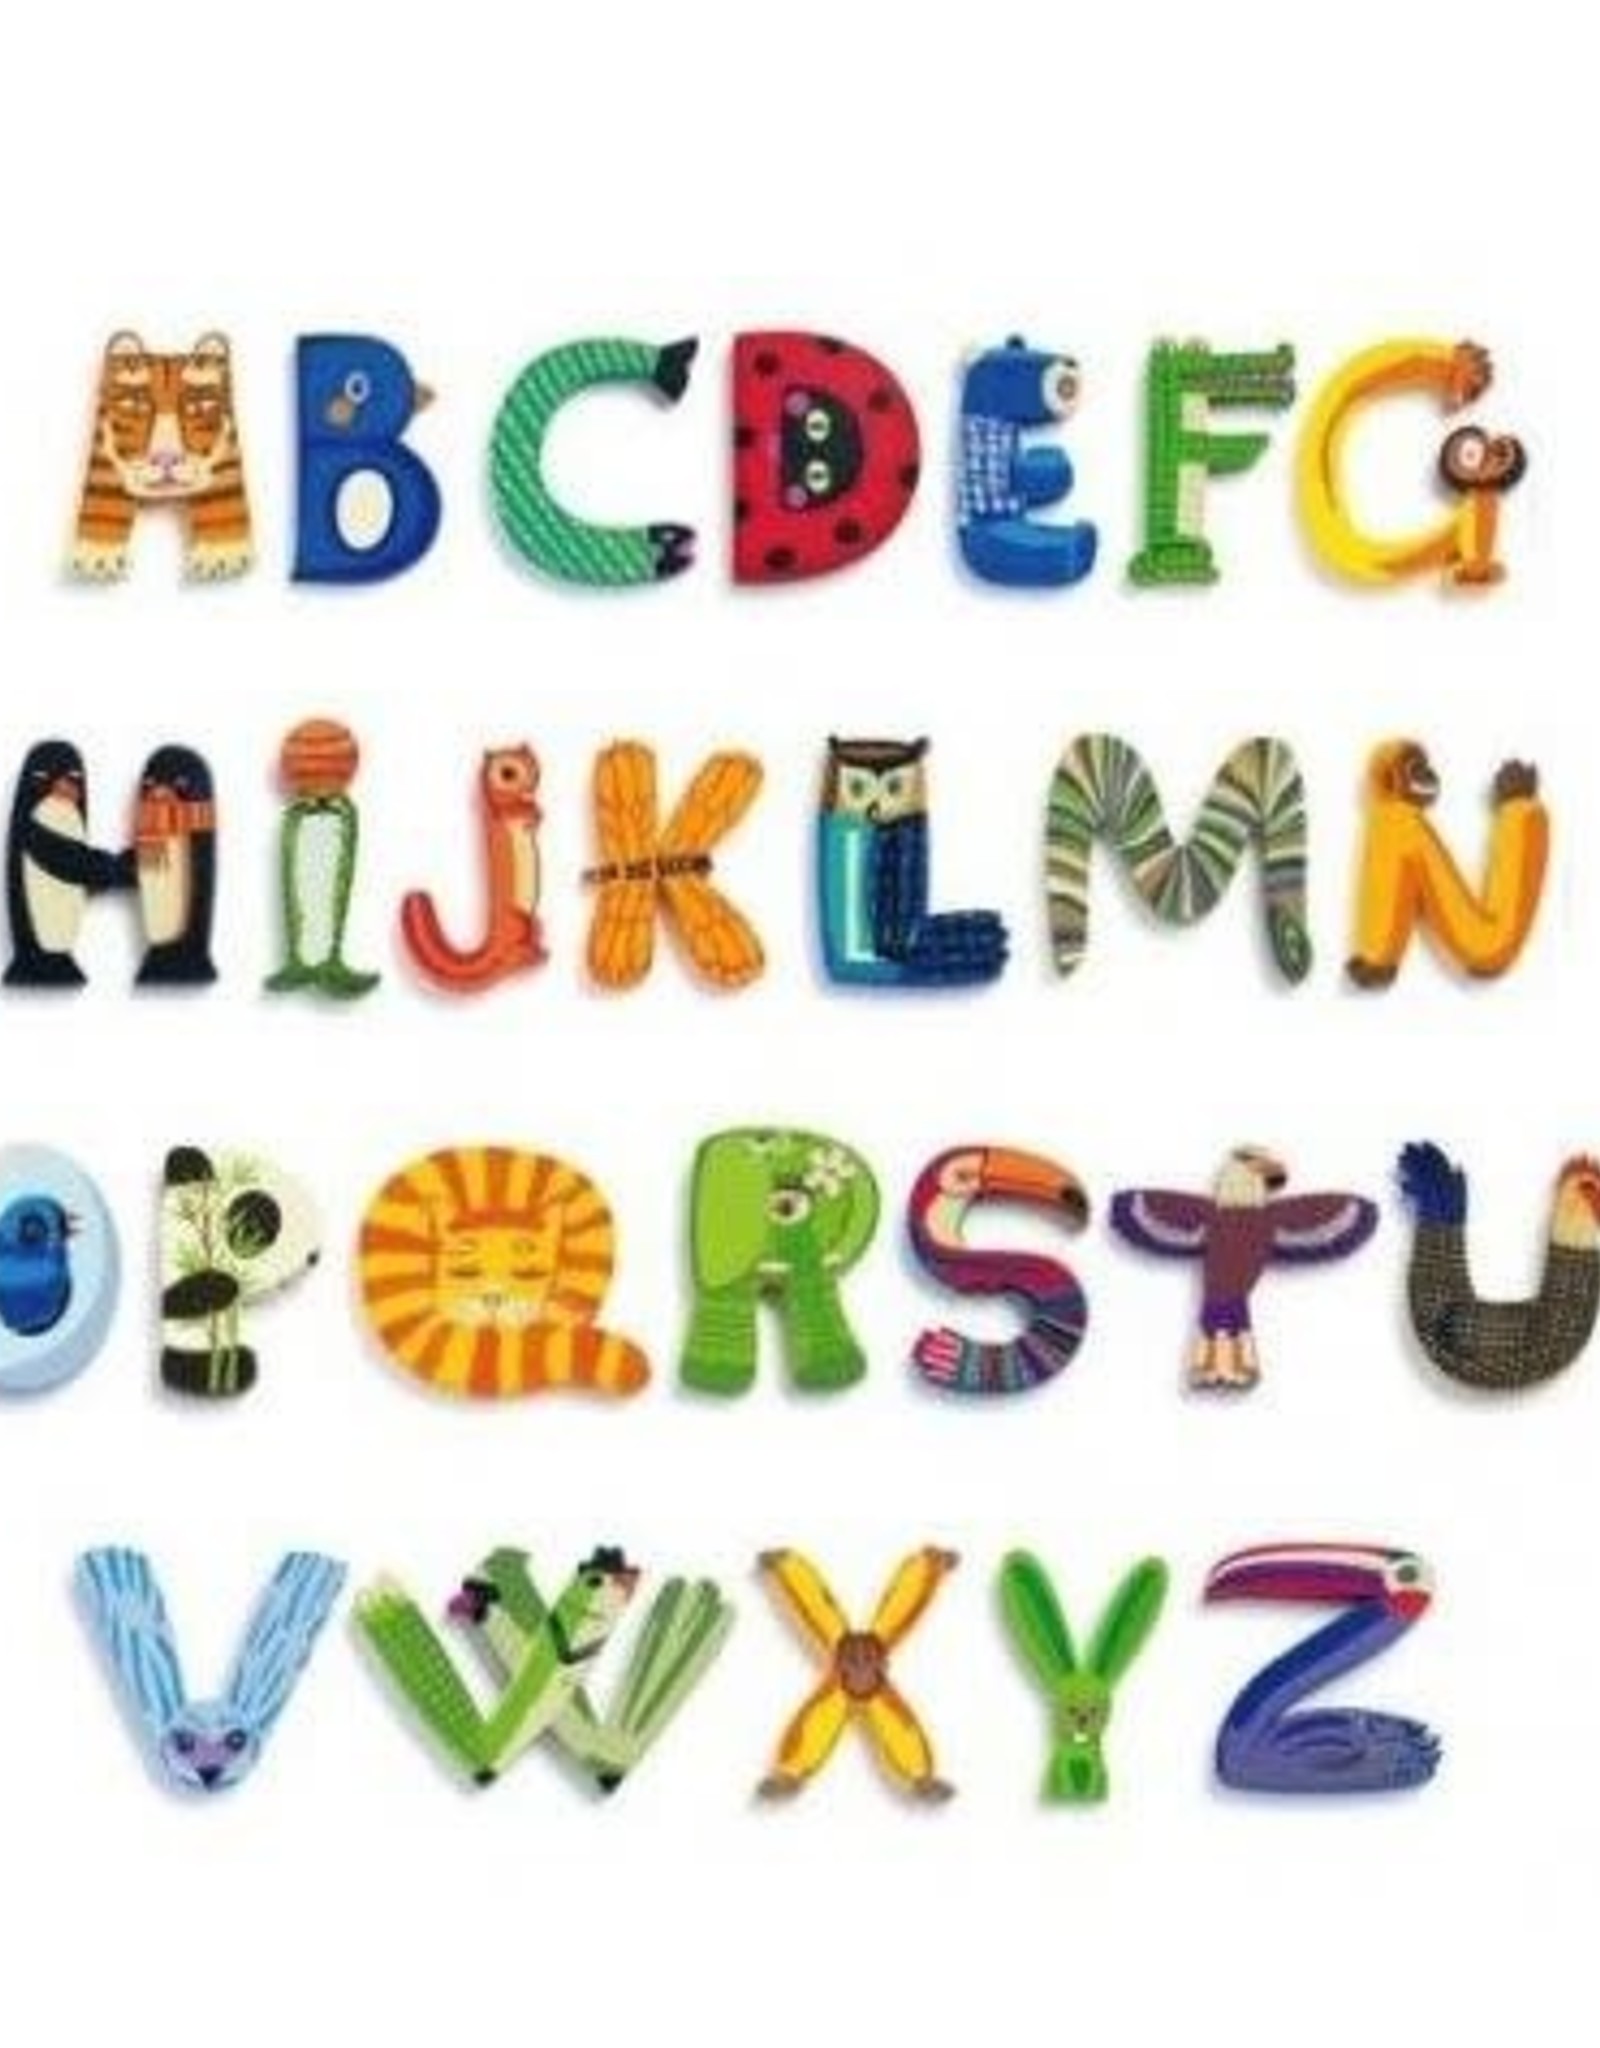 DJECO Wooden Animal Letters